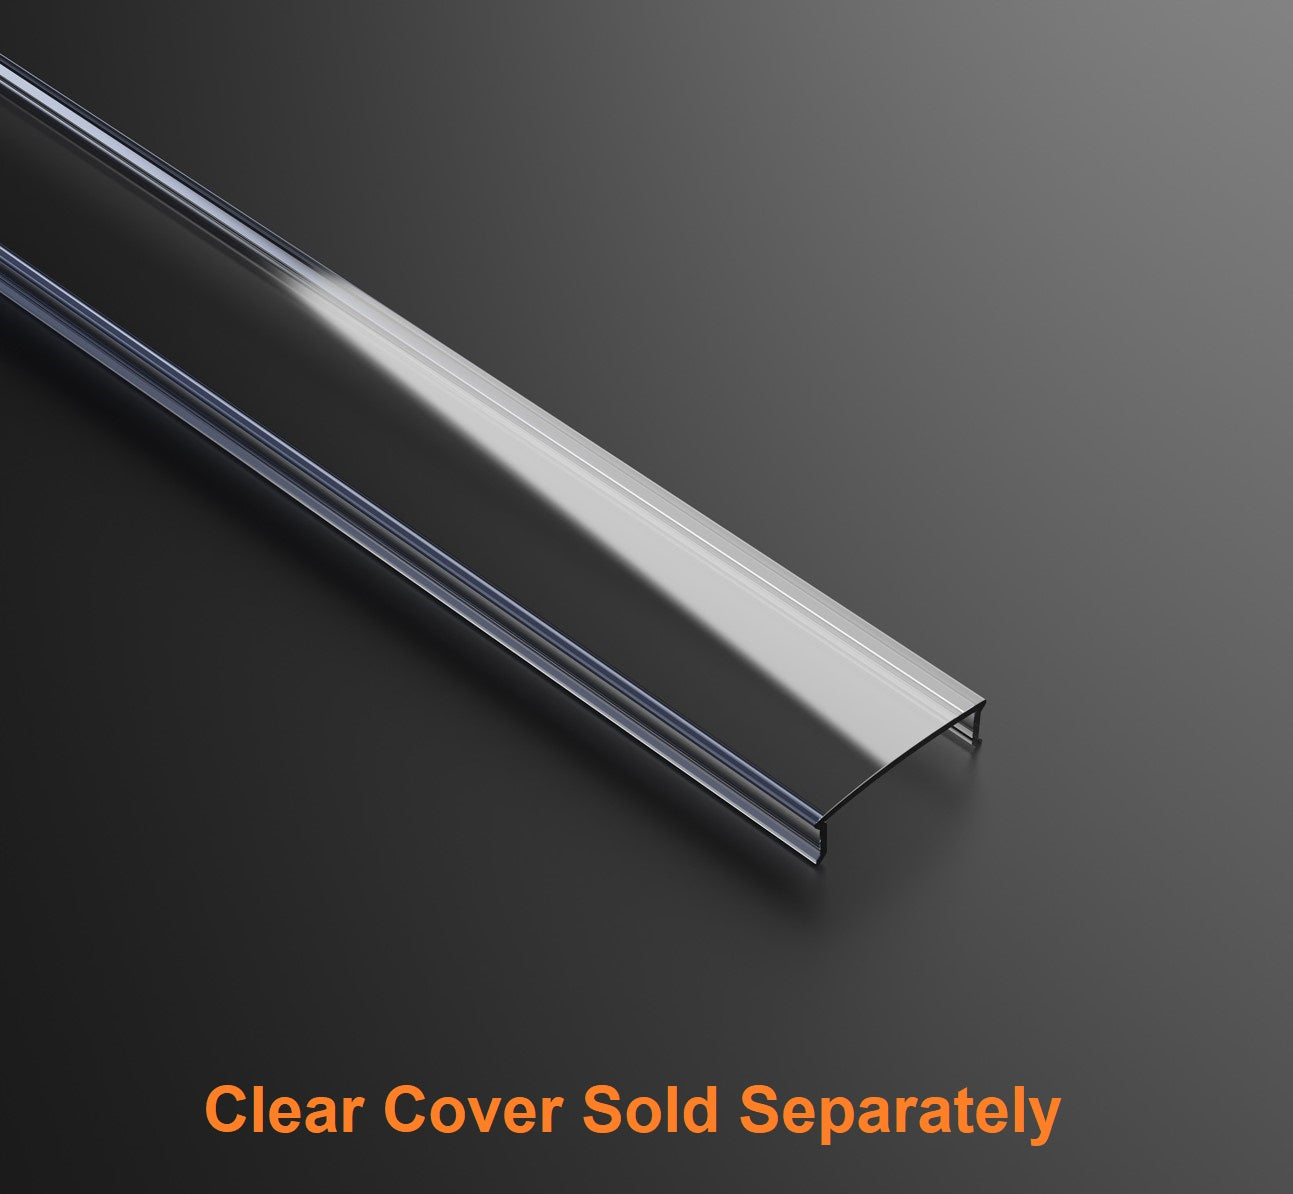 VBD-CH-S4 Linear Aluminum Channel 2.4Meters(94.4in) and 3Meters(118in), Veroboard